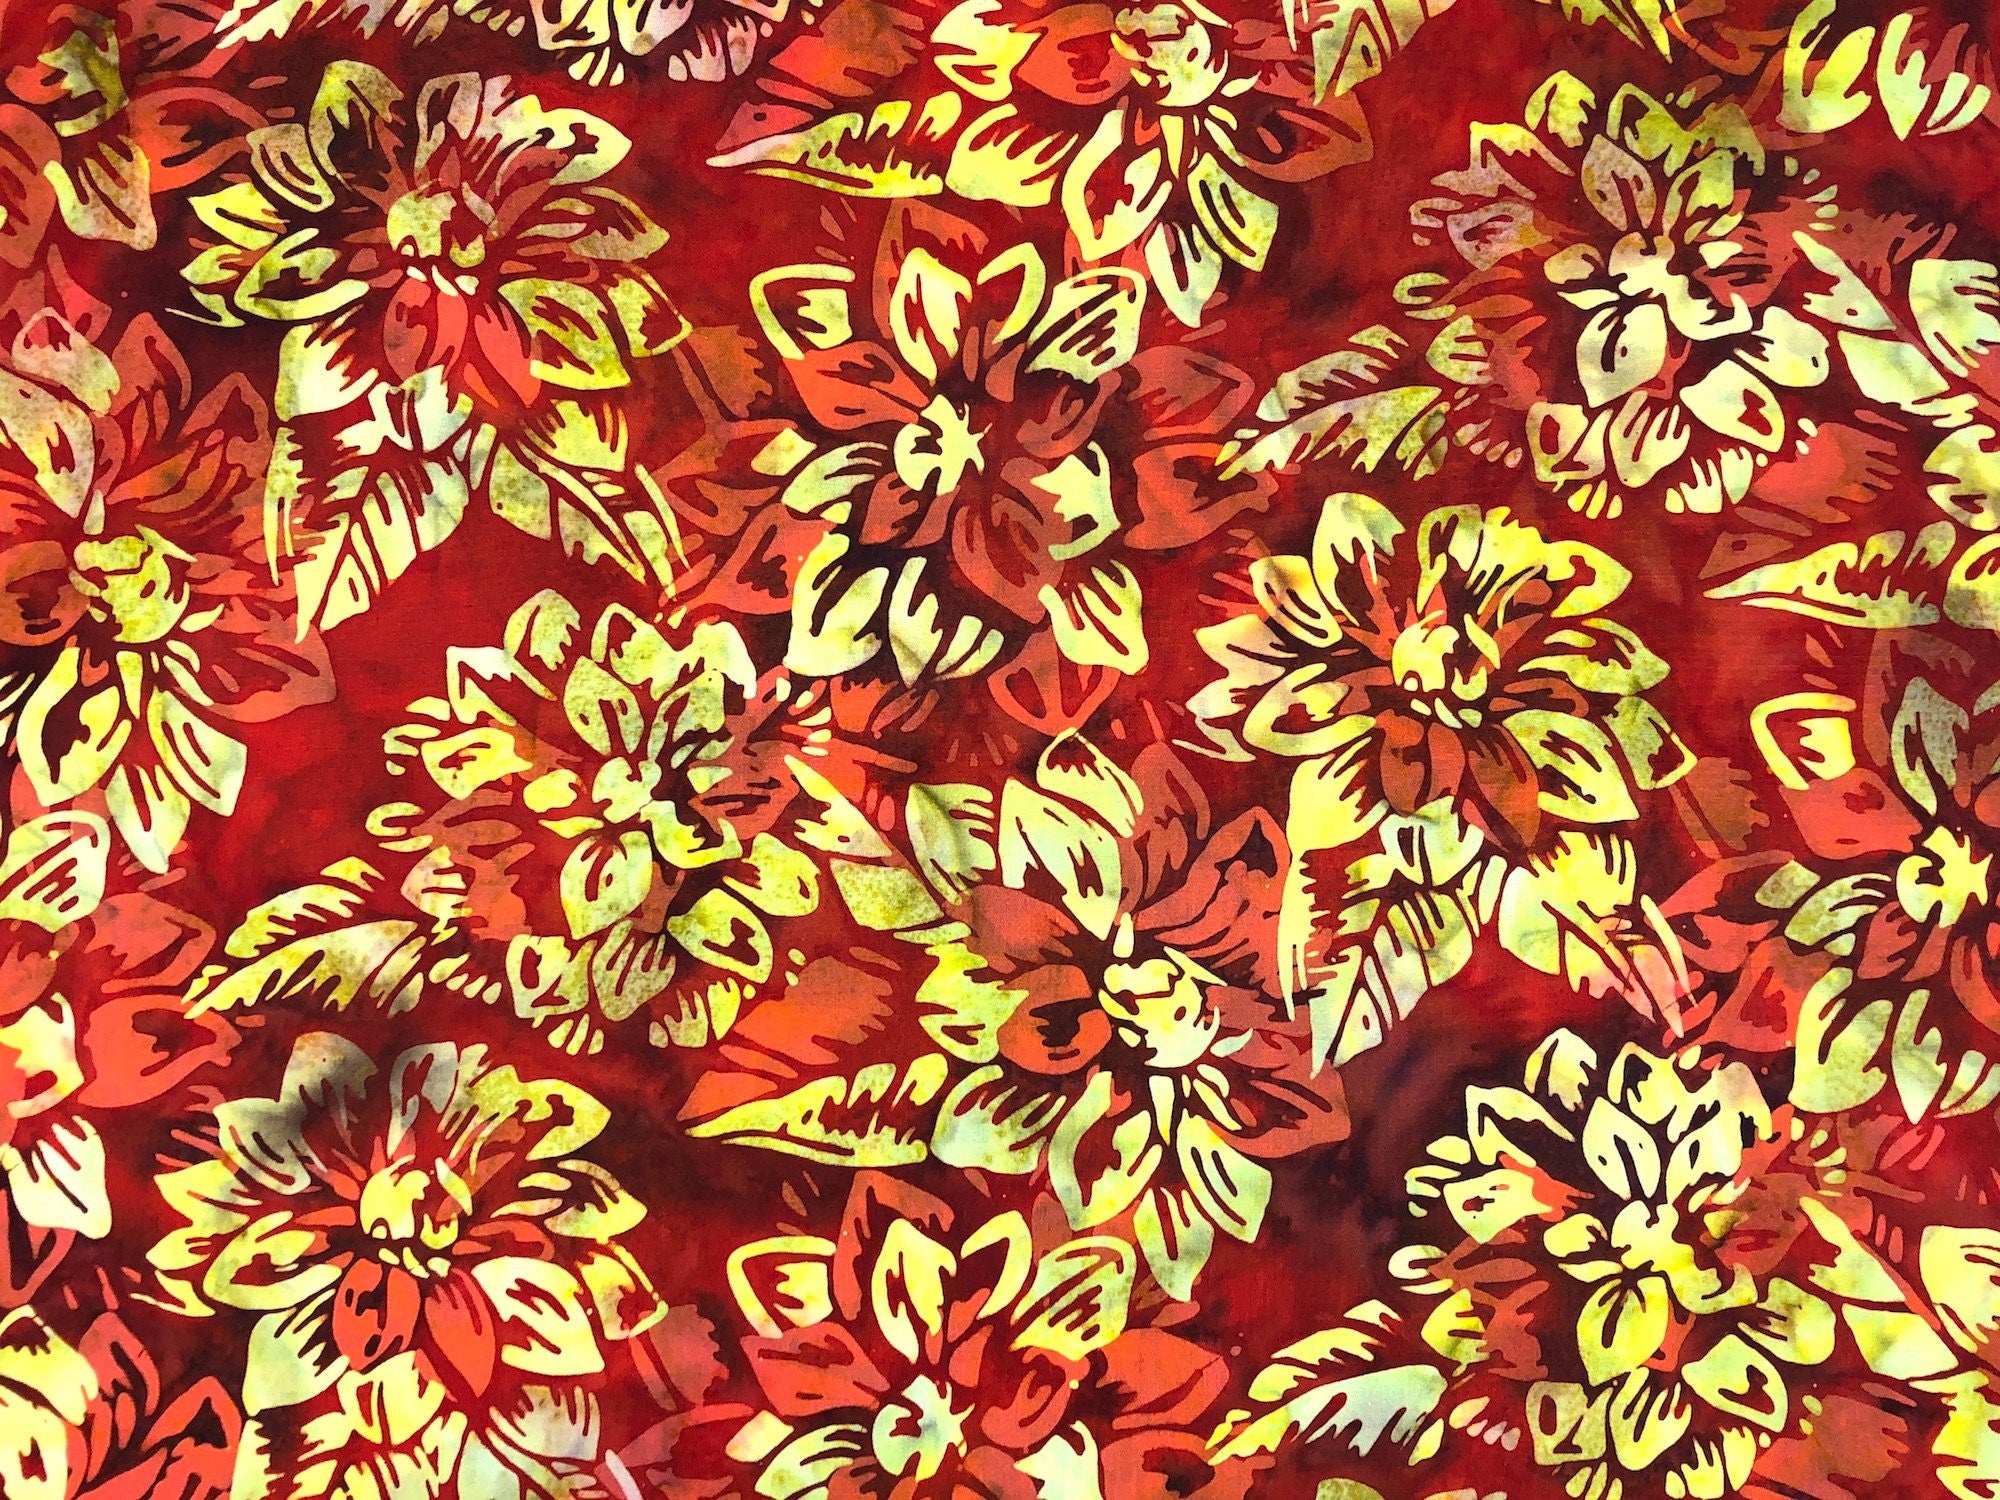 This batik fabric is covered with orange and yellow flowers. The background has several shades of brown and red.